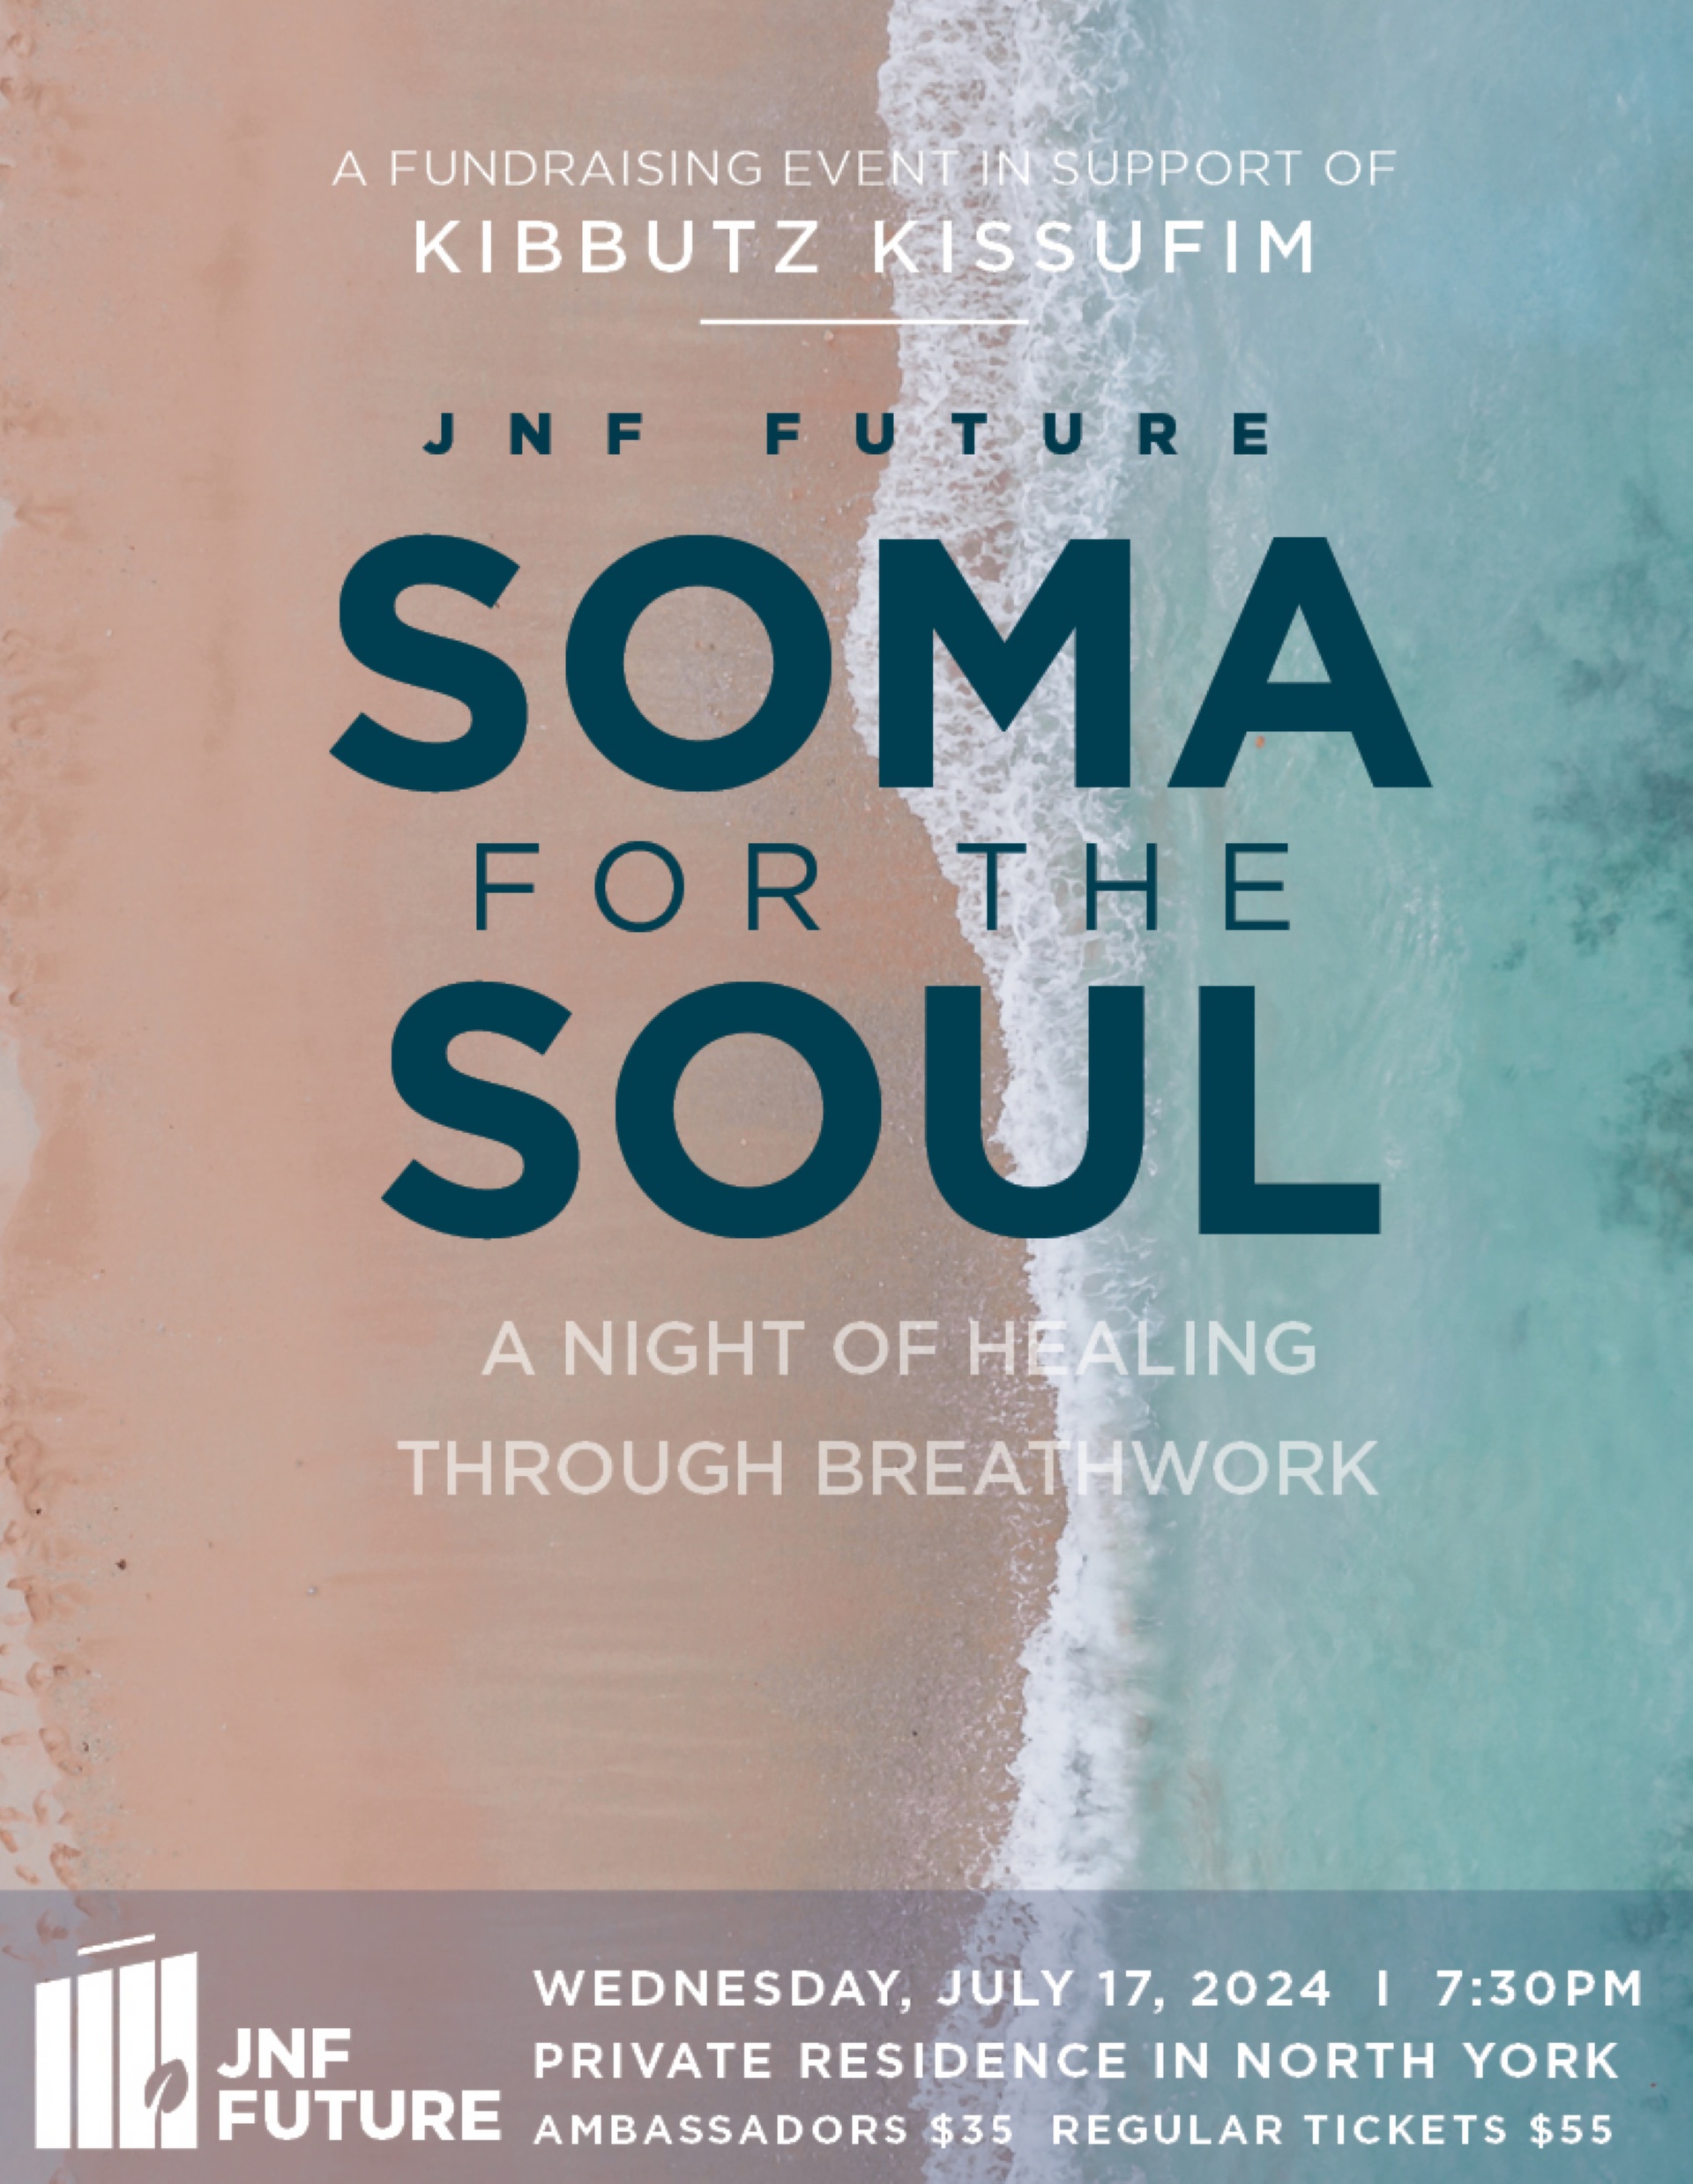 JNF Future: Soma for the Soul 